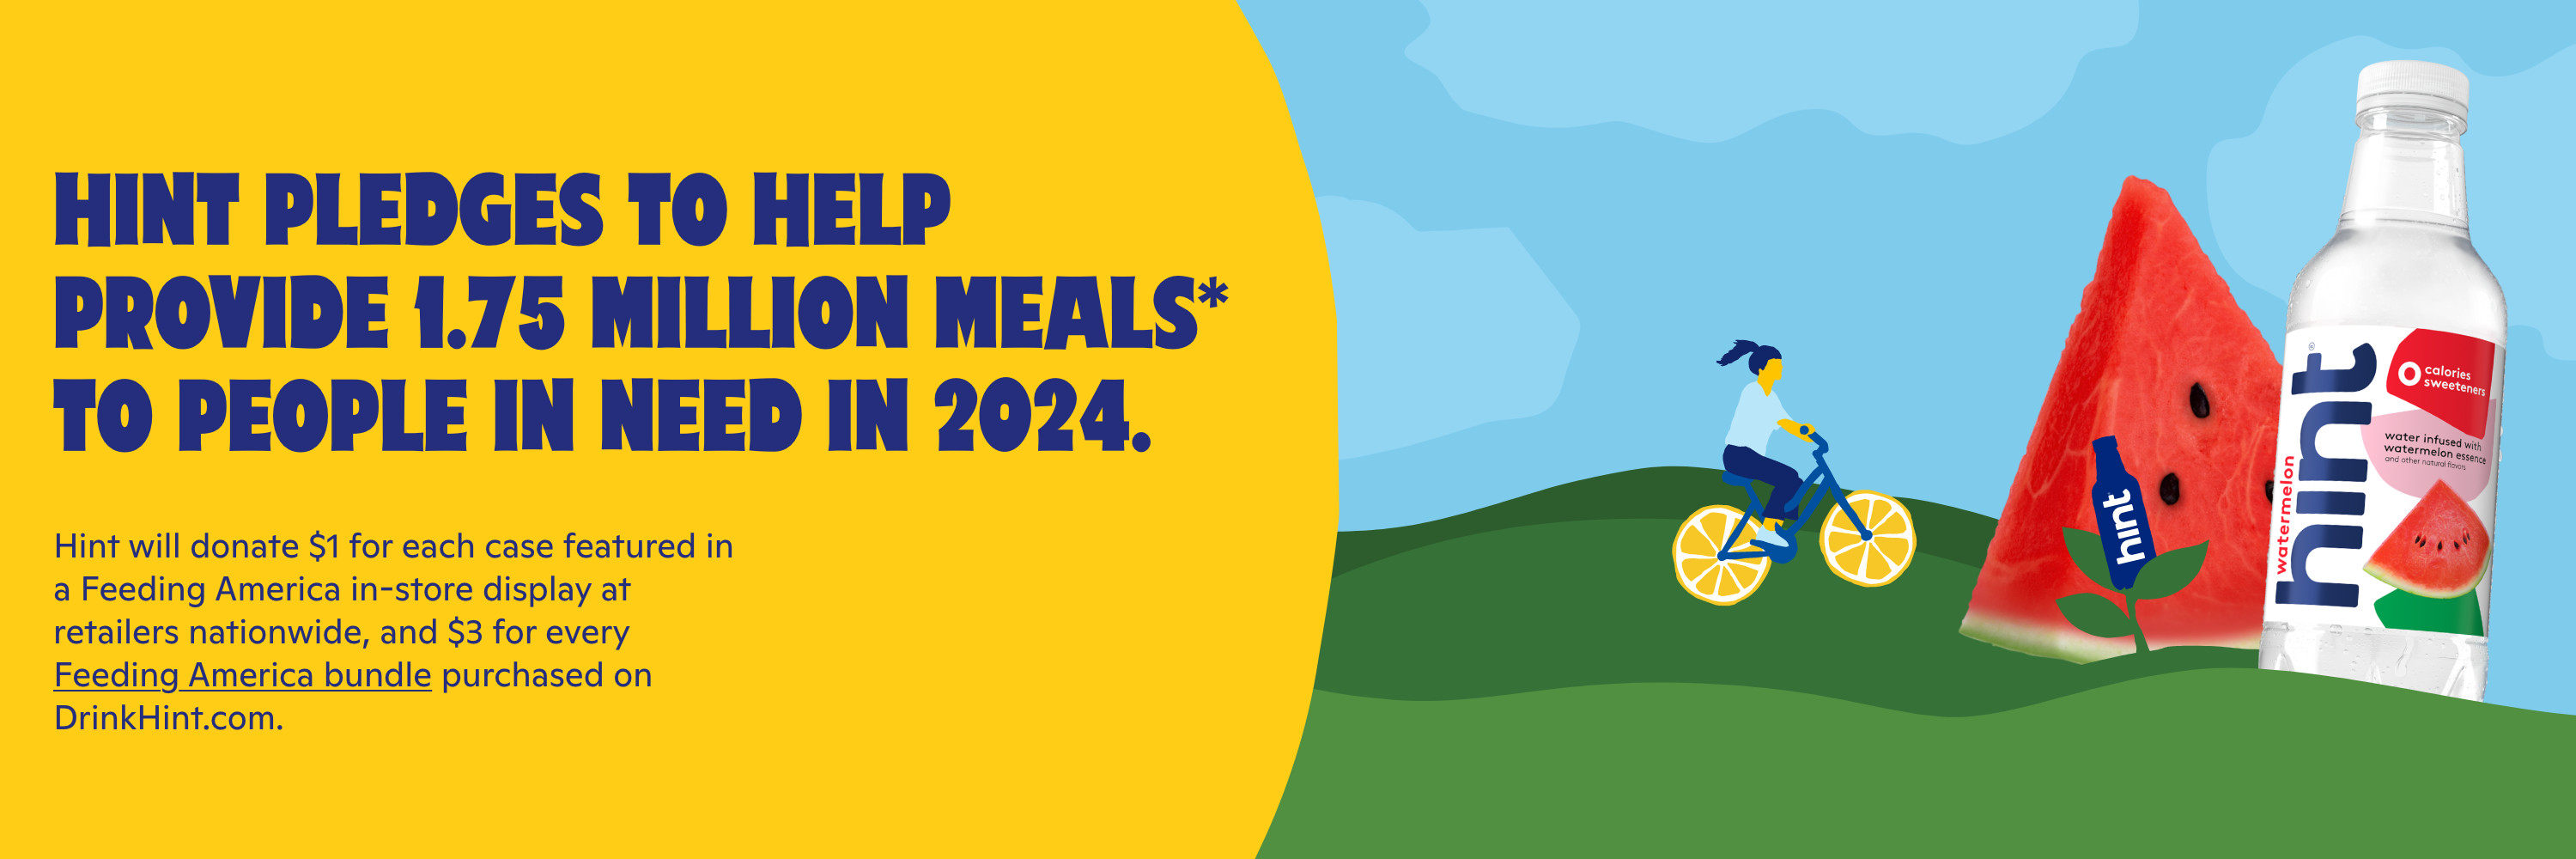 Hint pledges to help provide 1.75million meals to people in need in 2024.